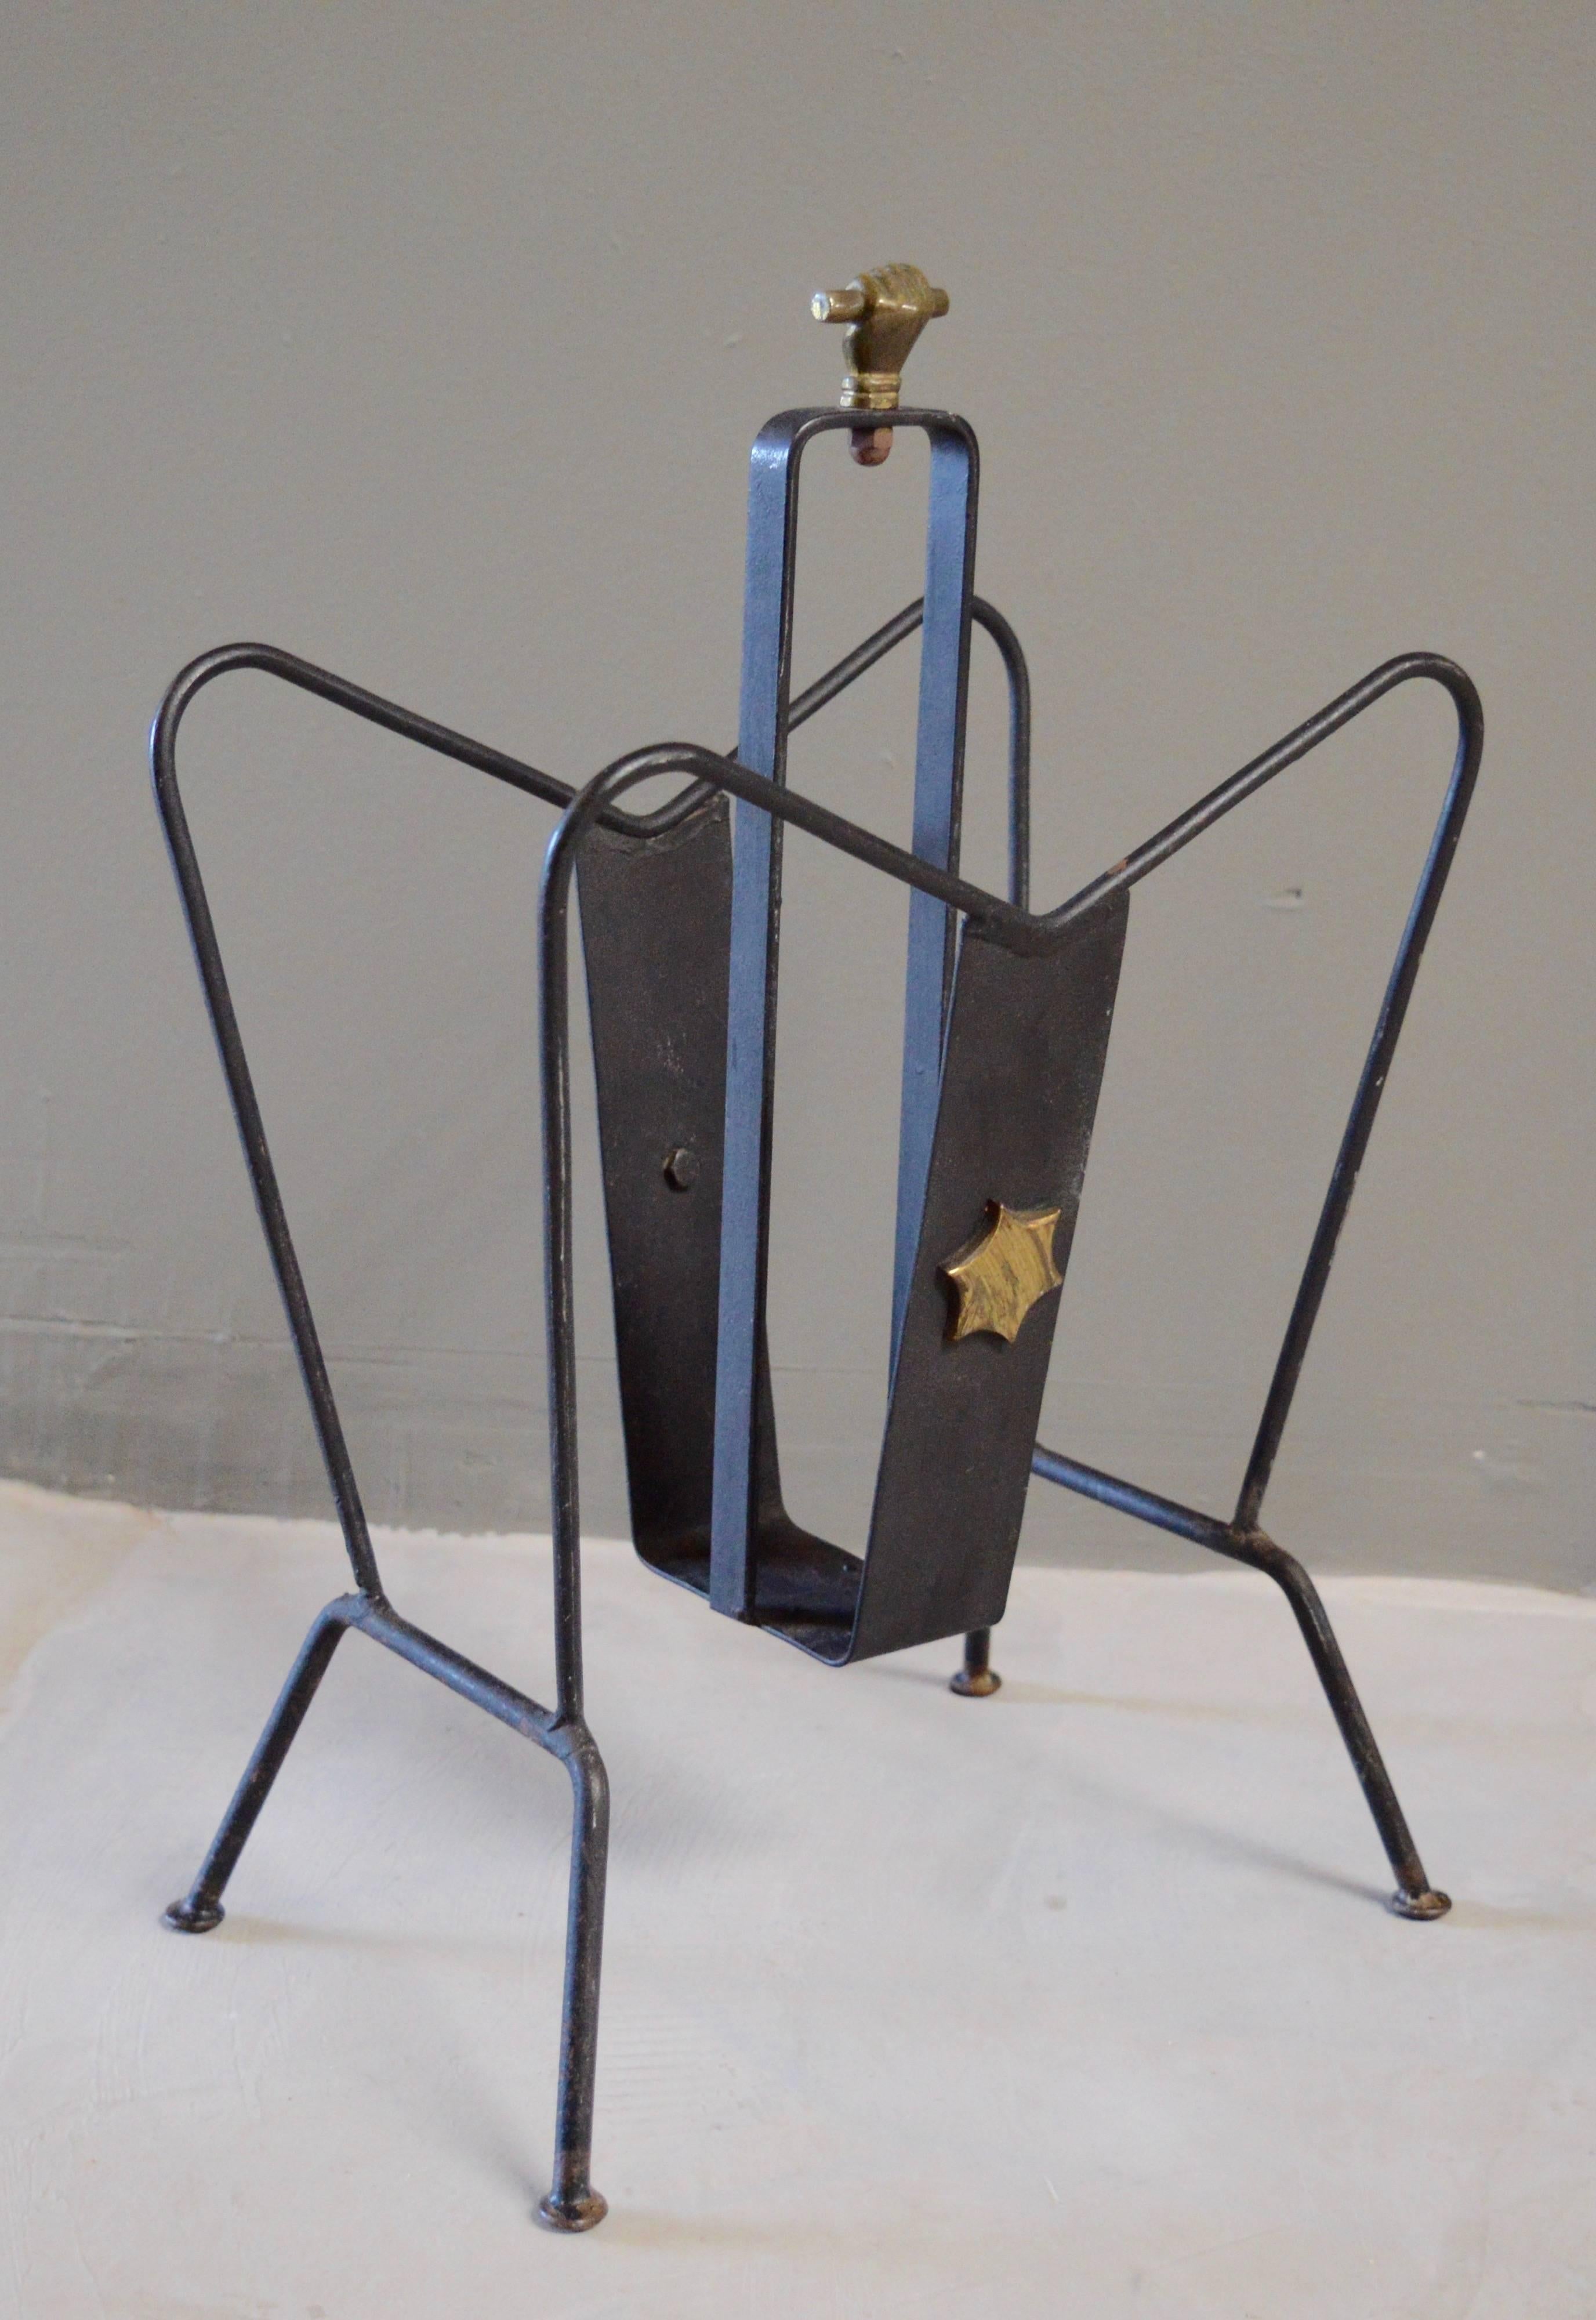 Handsome magazine rack by Jacques Adnet. Made of iron and brass. Excellent vintage condition. Star detail on both sides and closed fist on top. Great piece!